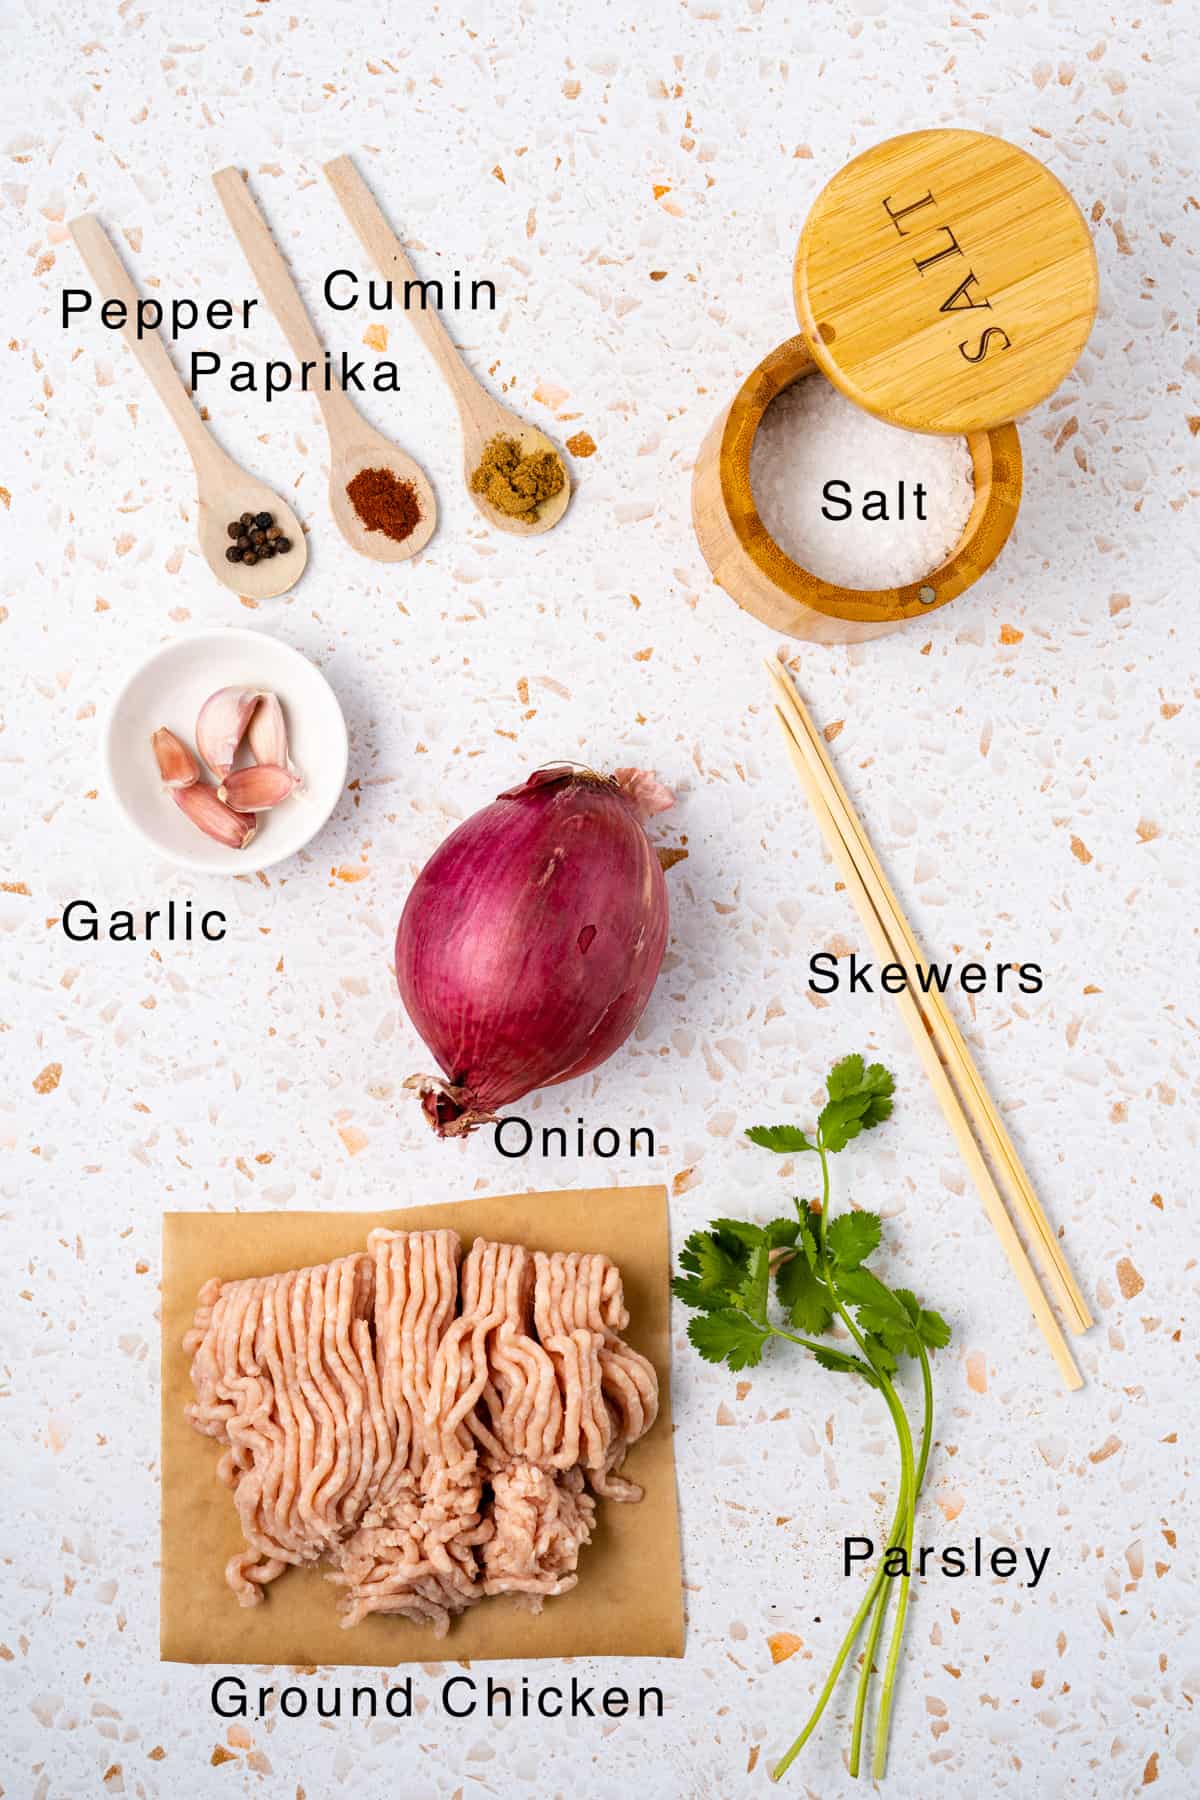 Ingredients for the chicken kafta laid out on the table.